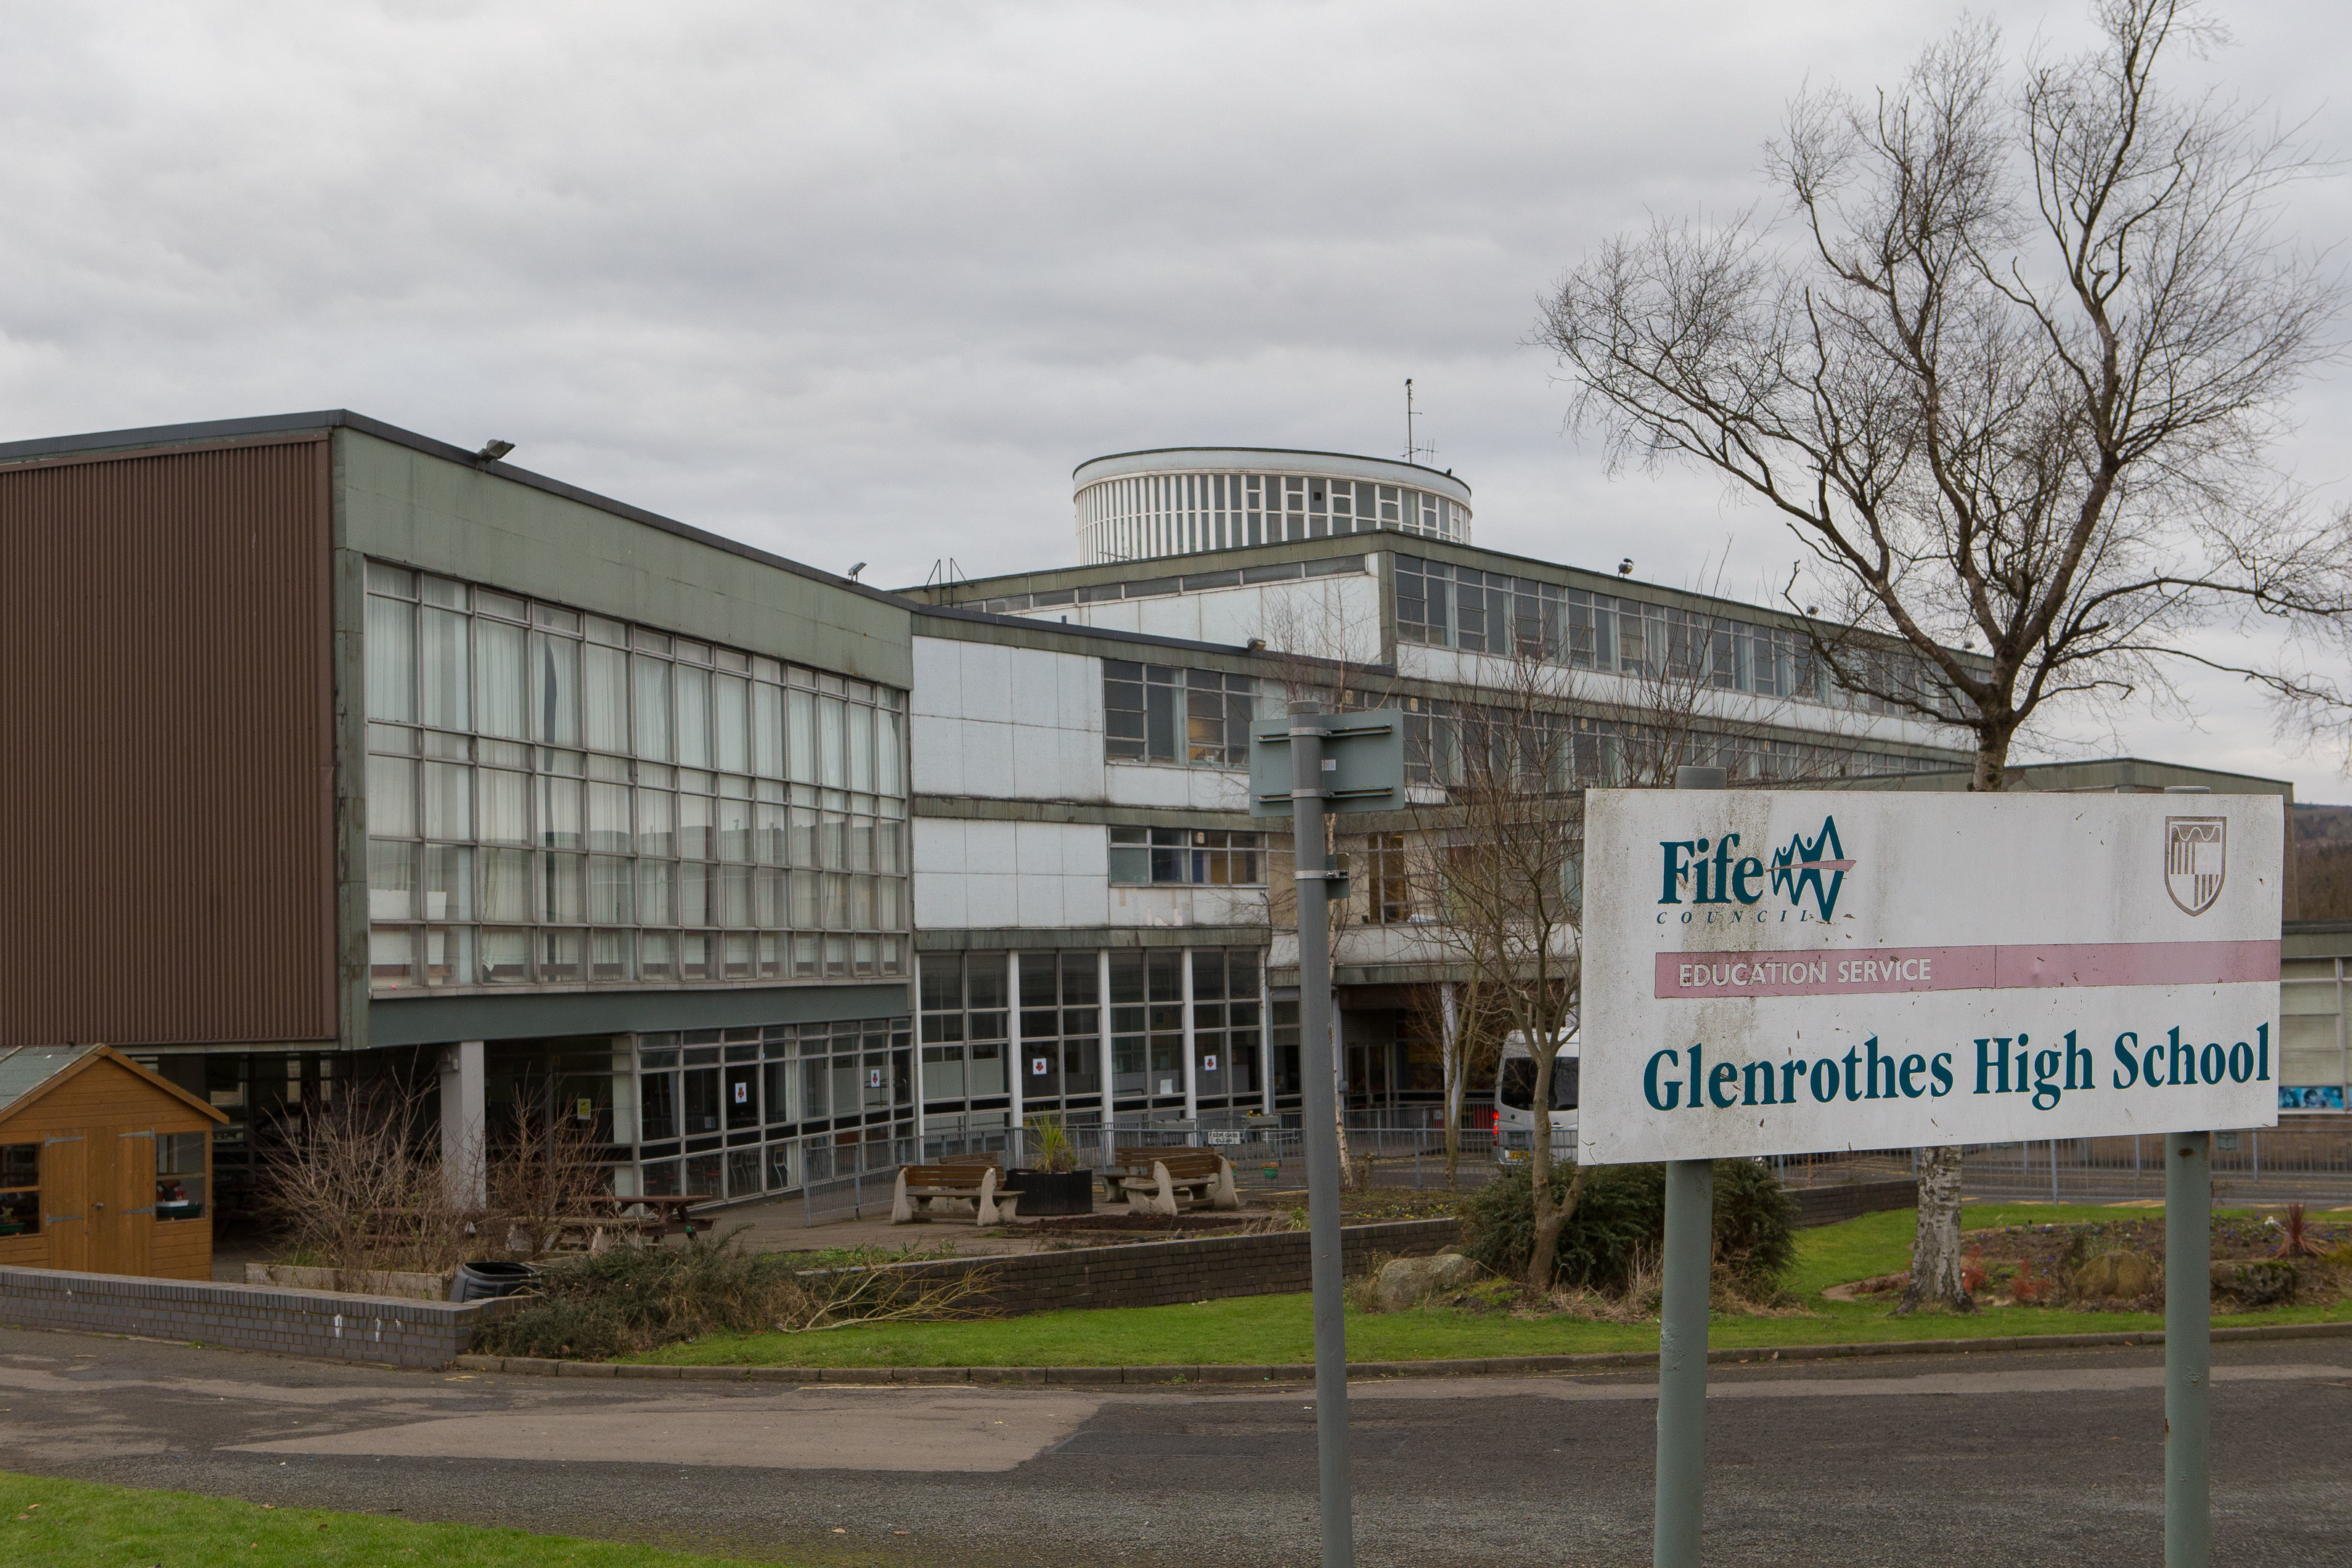 Police attended Glenrothes High School